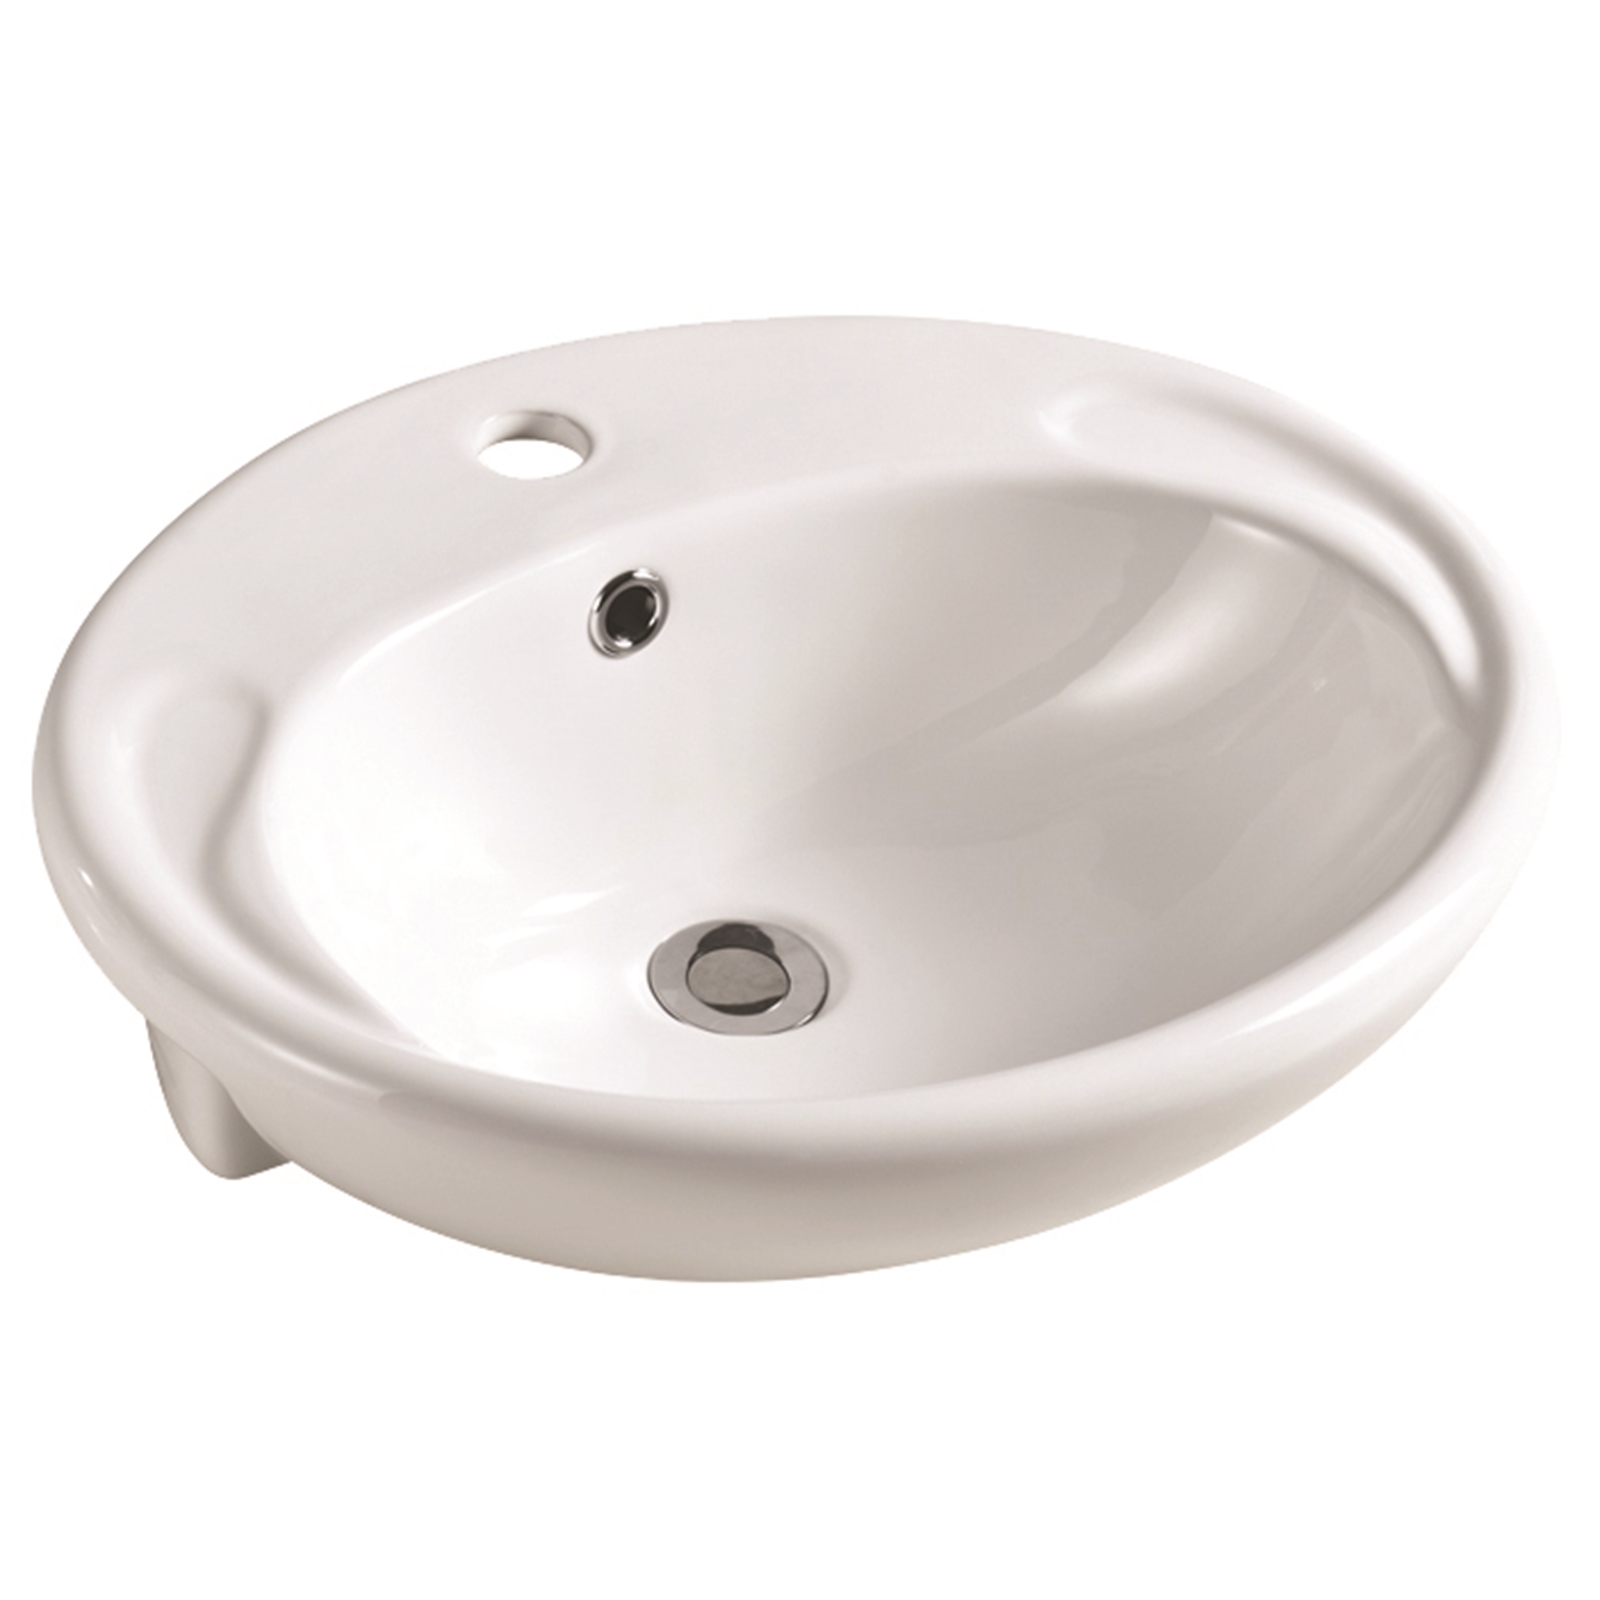 Everhard 1TH Virtue Oval Semi Recessed Basin with Chrome Pop Up Waste